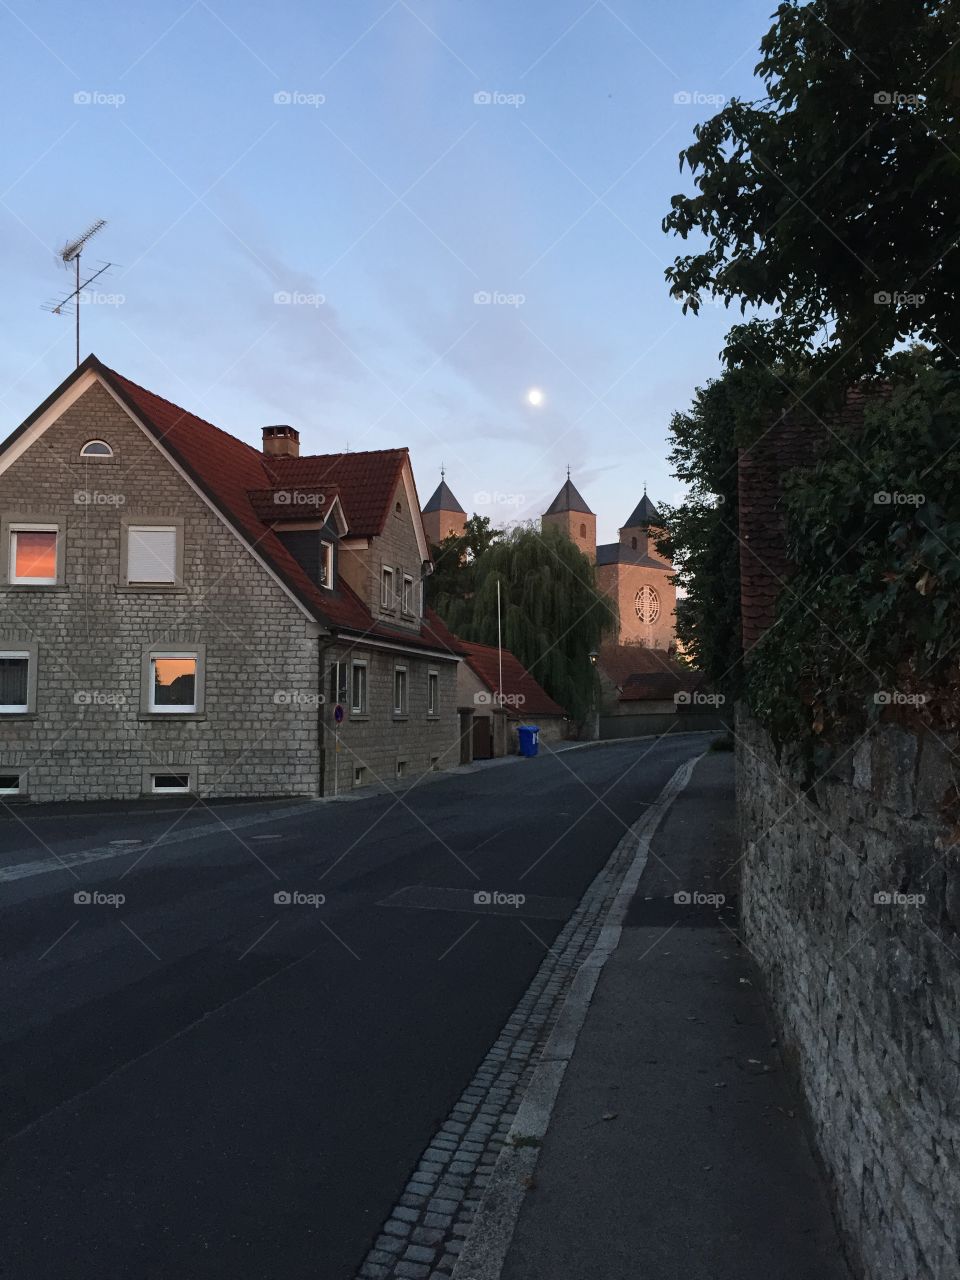 Street, No Person, Road, Home, Building